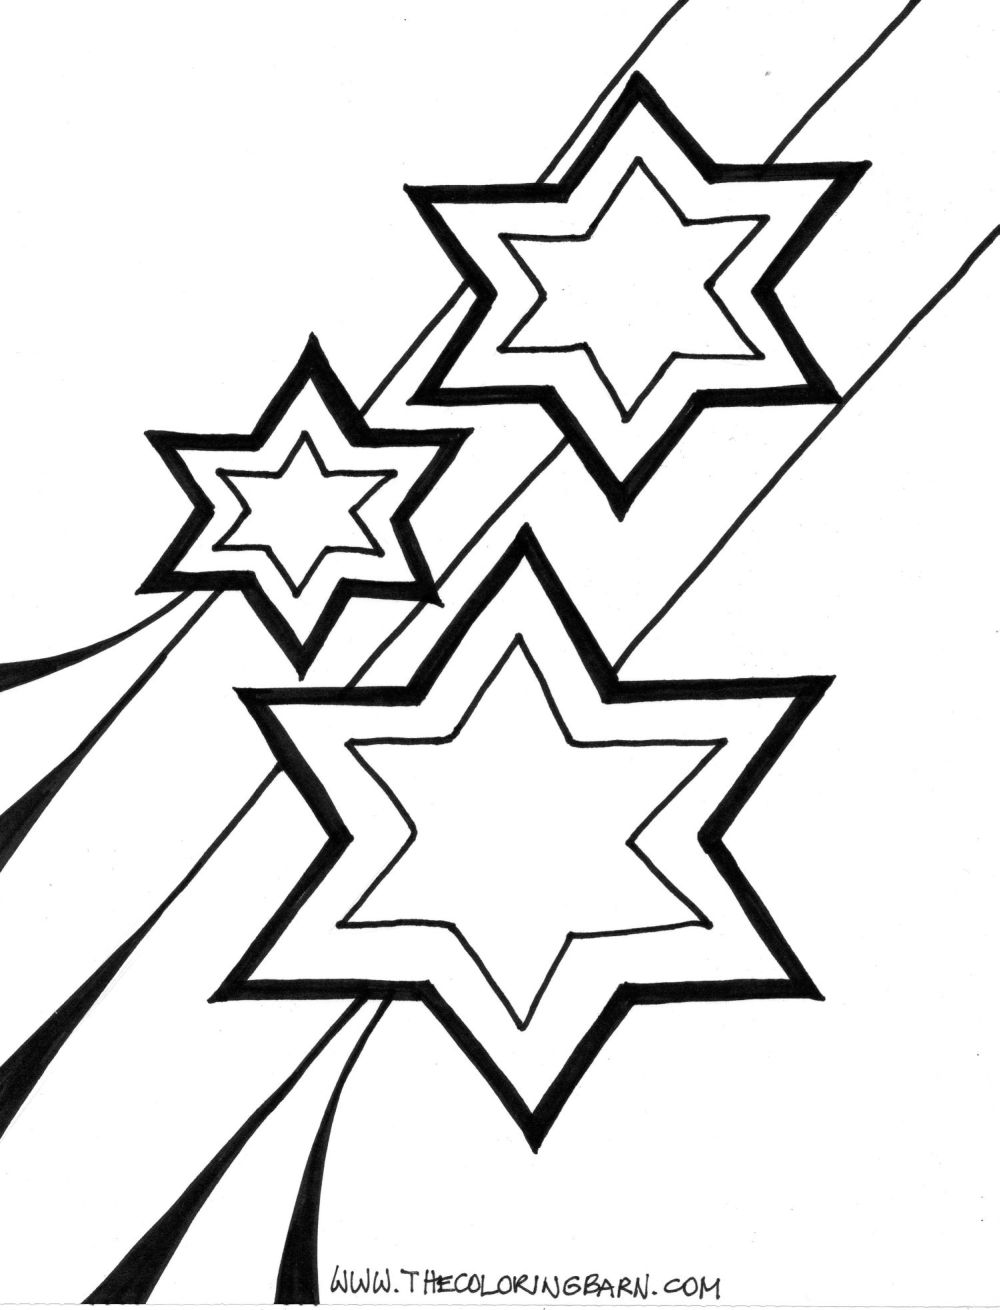 Coloring Book Pages Of Stars - Coloring